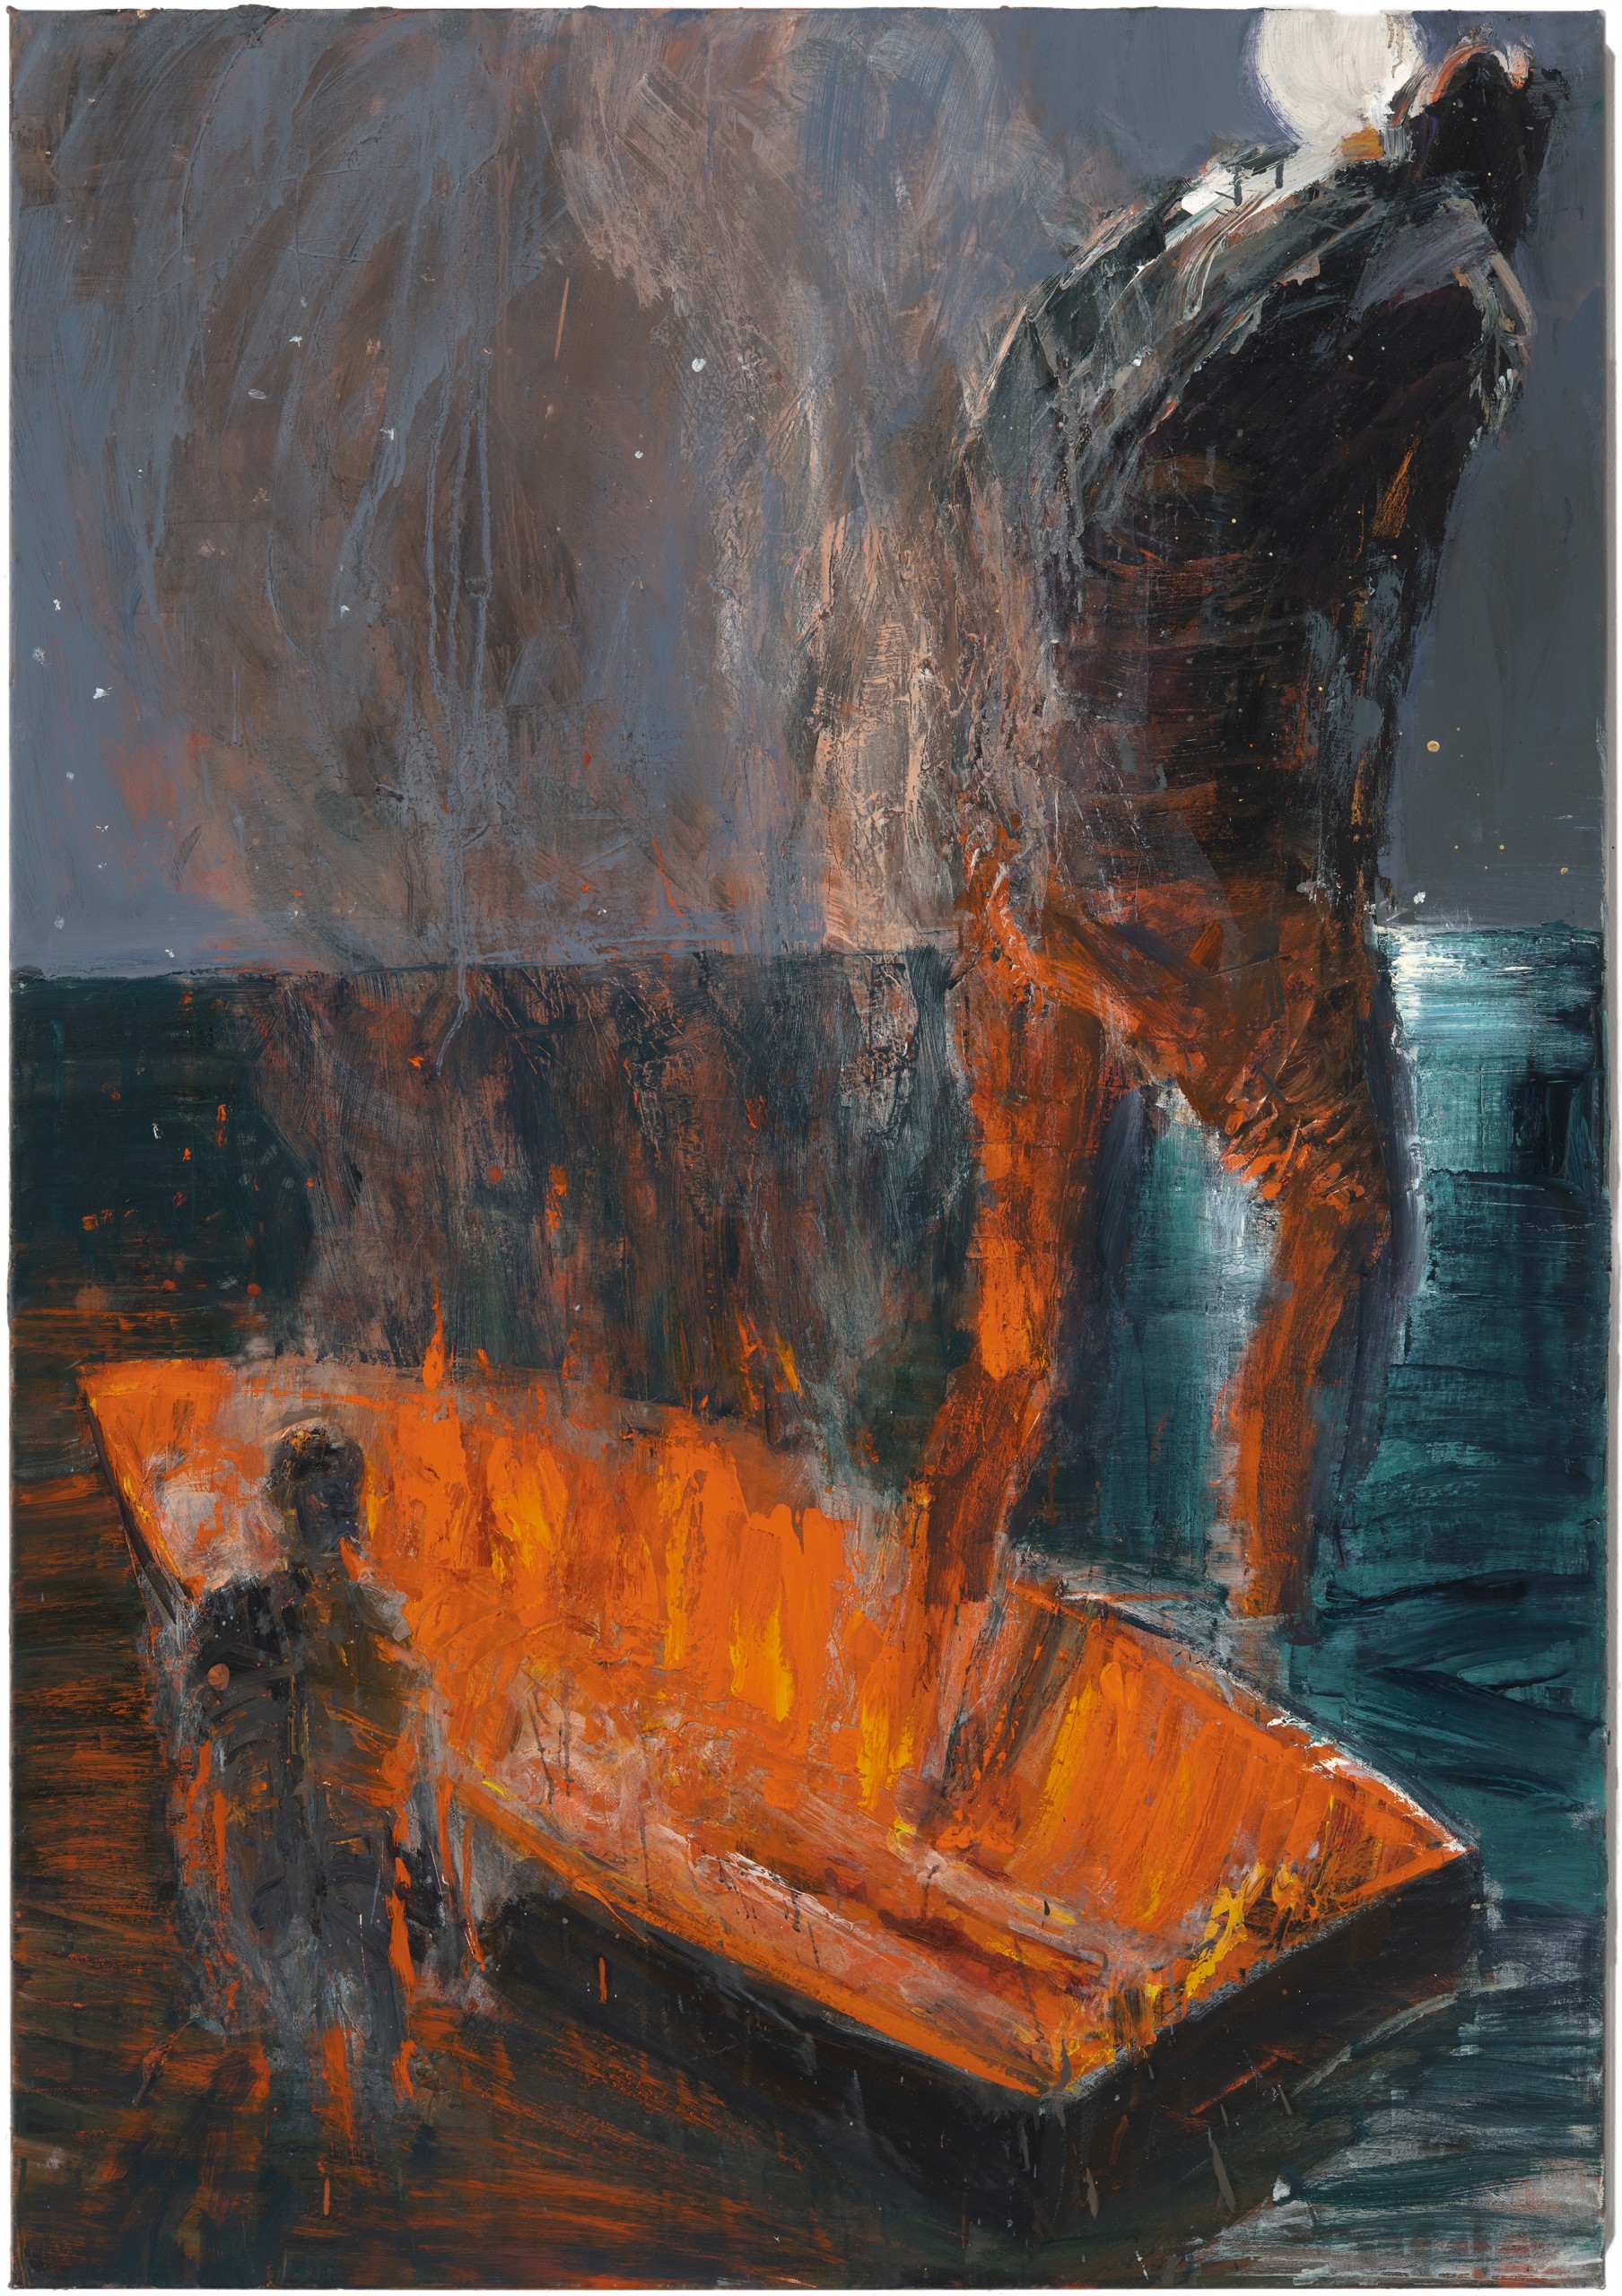 Figures Moon and Burning Boat - King Street Gallery on William